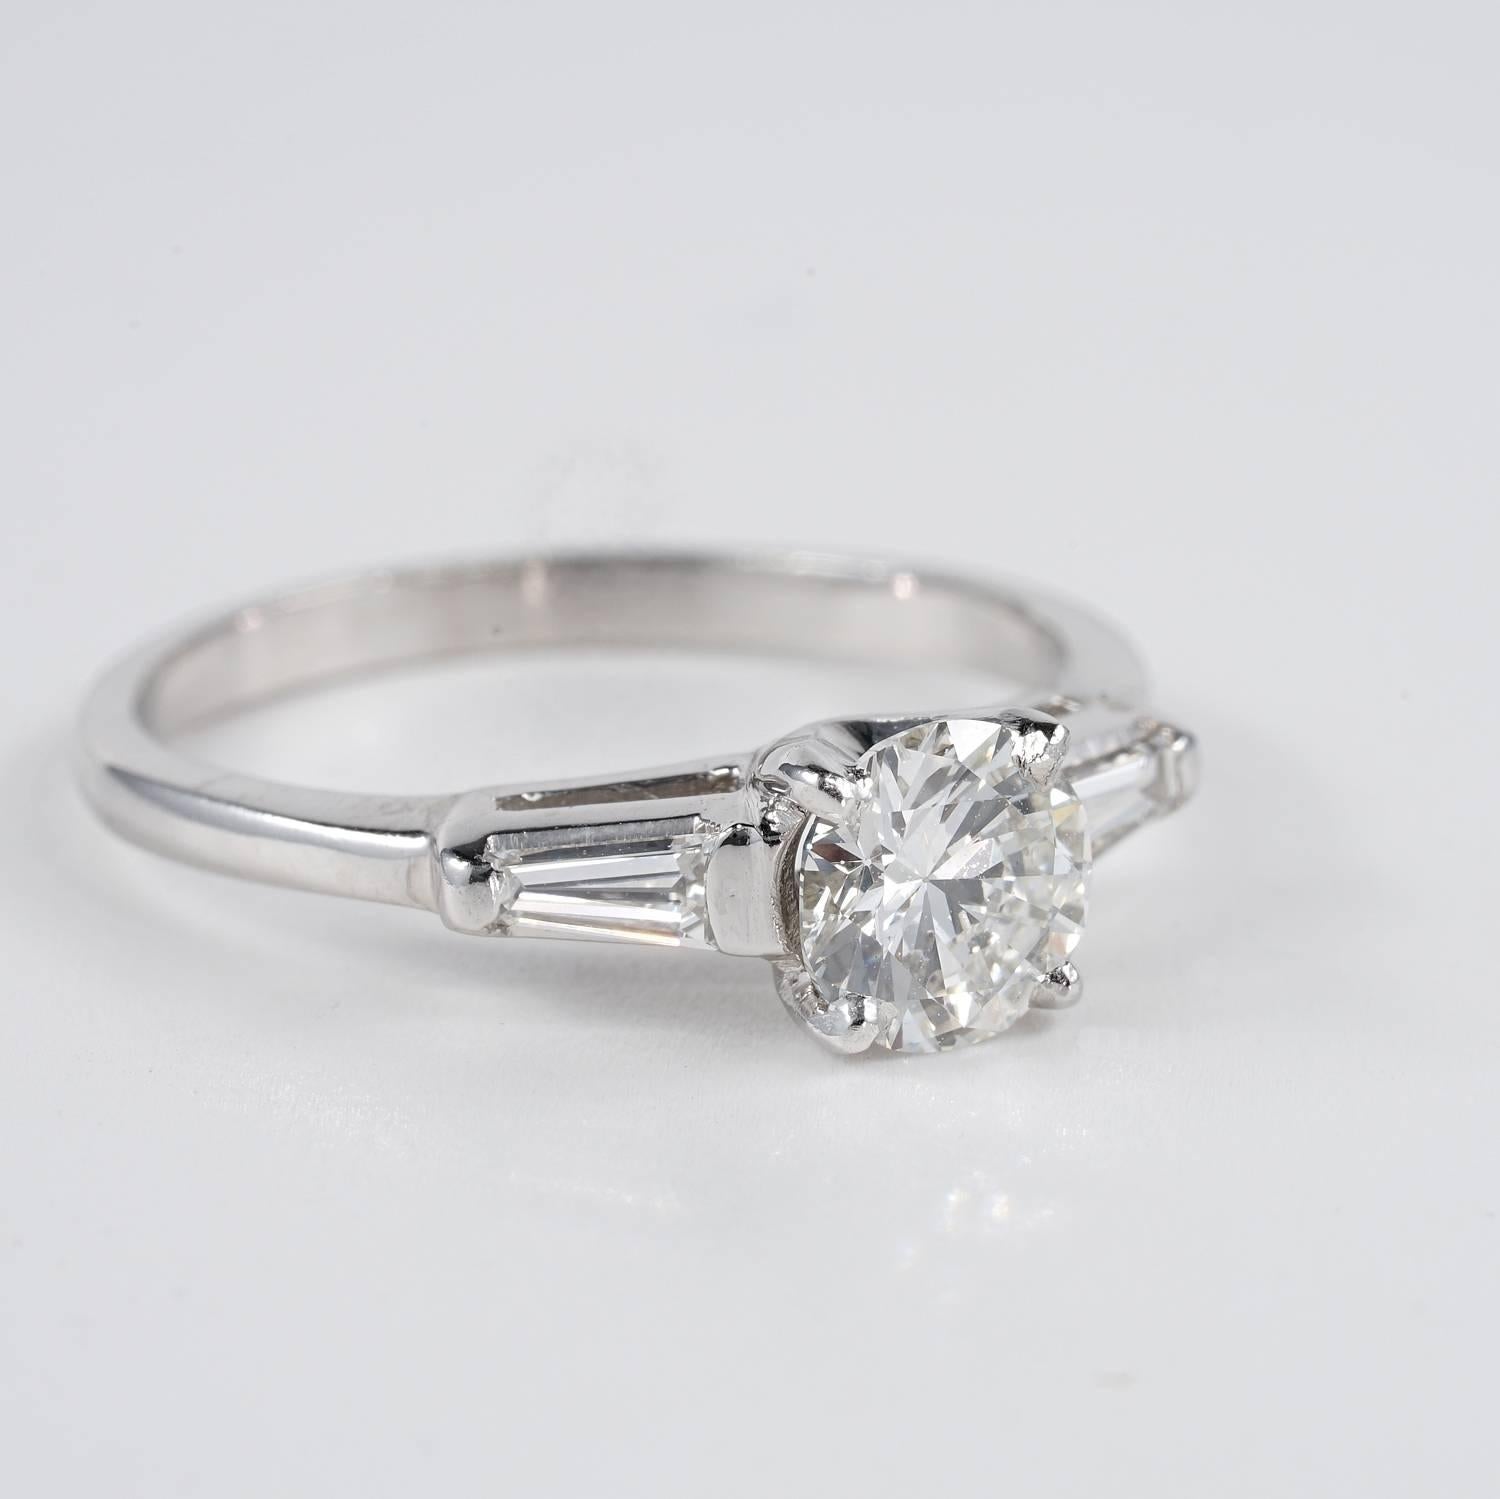 A superb Art Deco Diamond engagement ring all platinum made
Centrally set with a glittering old European cut Diamond of .75 Ct rated G VS
with sides tapered baguettes of .30 CT (G VVS/VS) completing the timeless designed
Skilfully hand crafted of